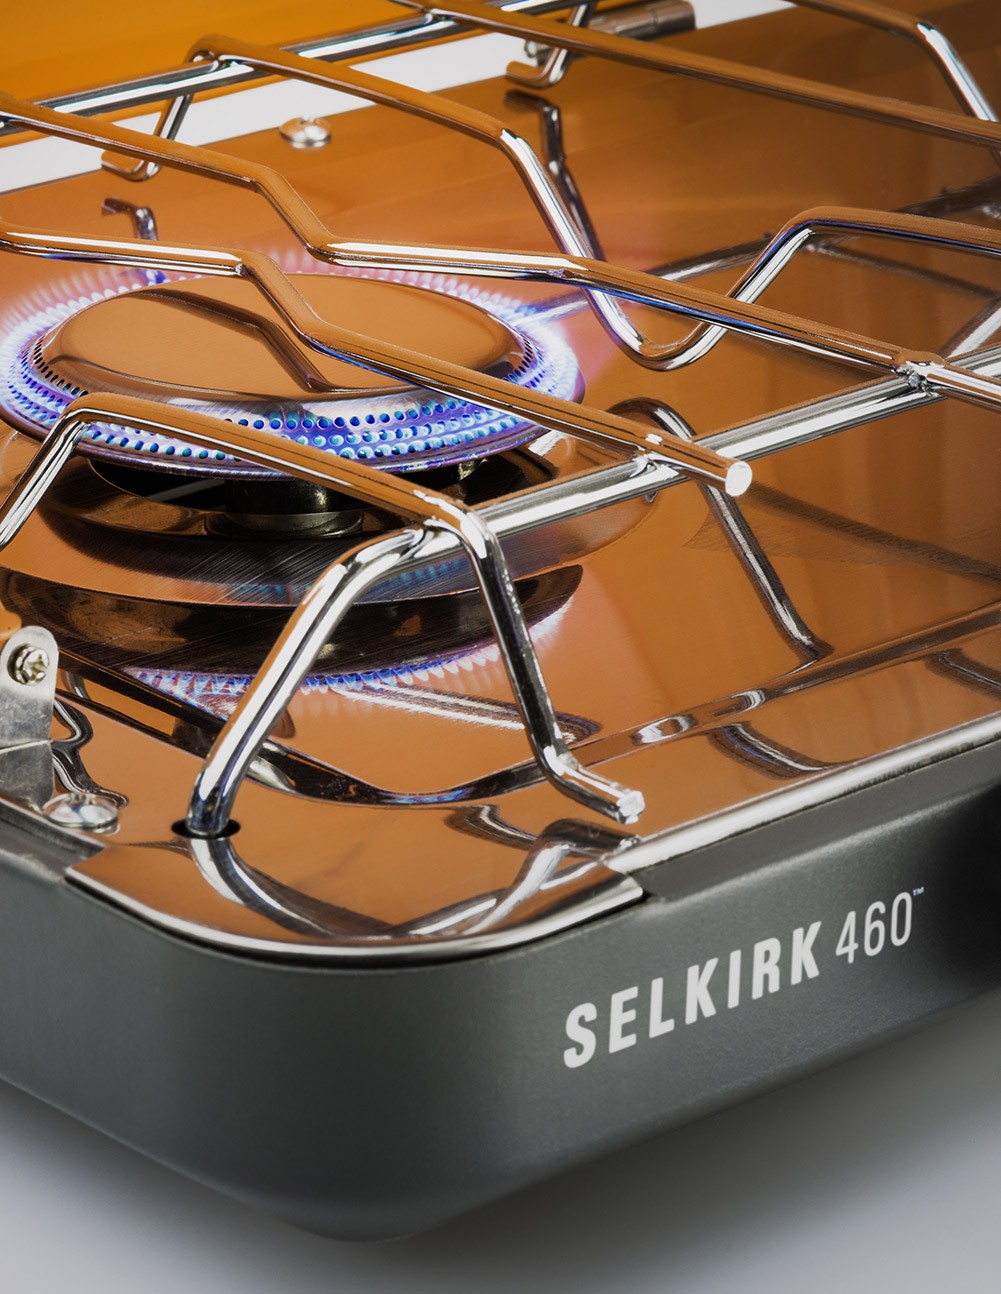 Selkirk 460+ Camp Stove